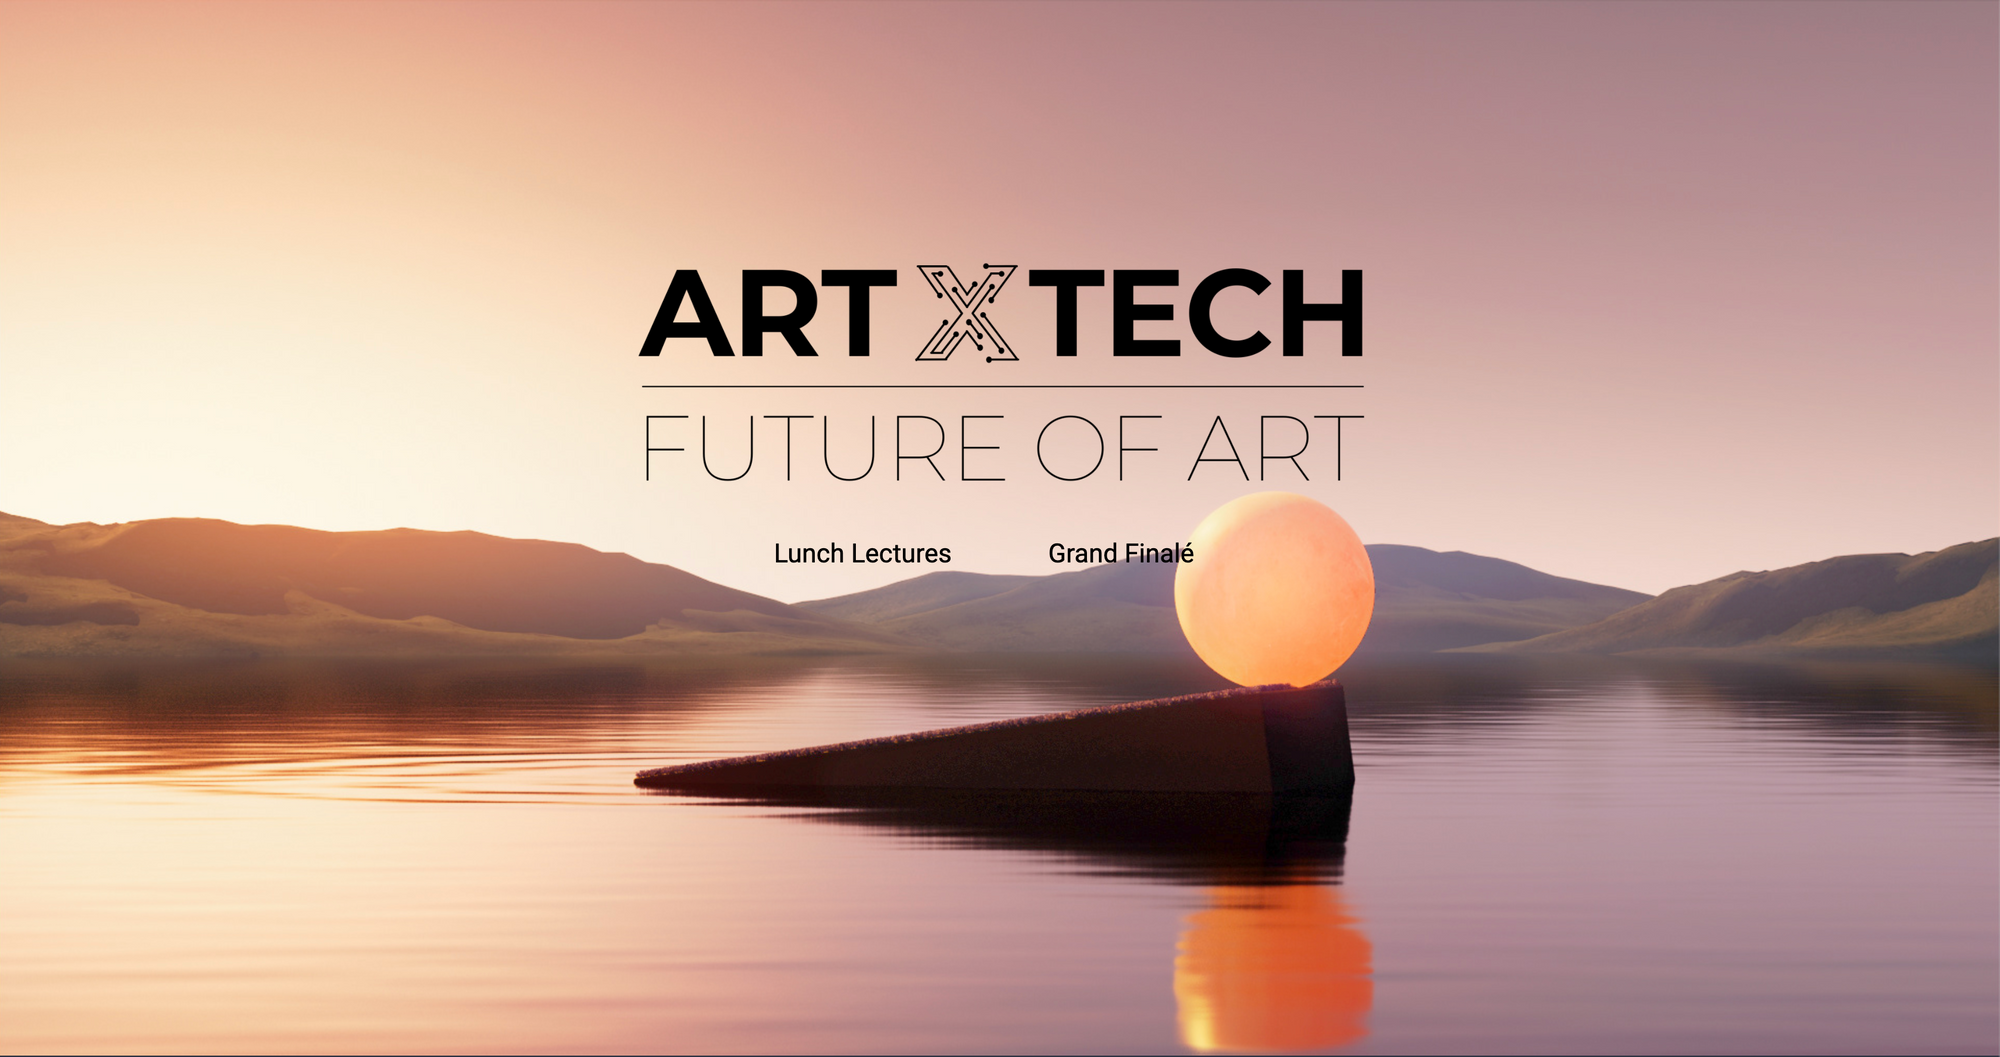 ArtxTech streaming panel discussion and exhibition in Metaverse live from Fotografiska in Stockholm